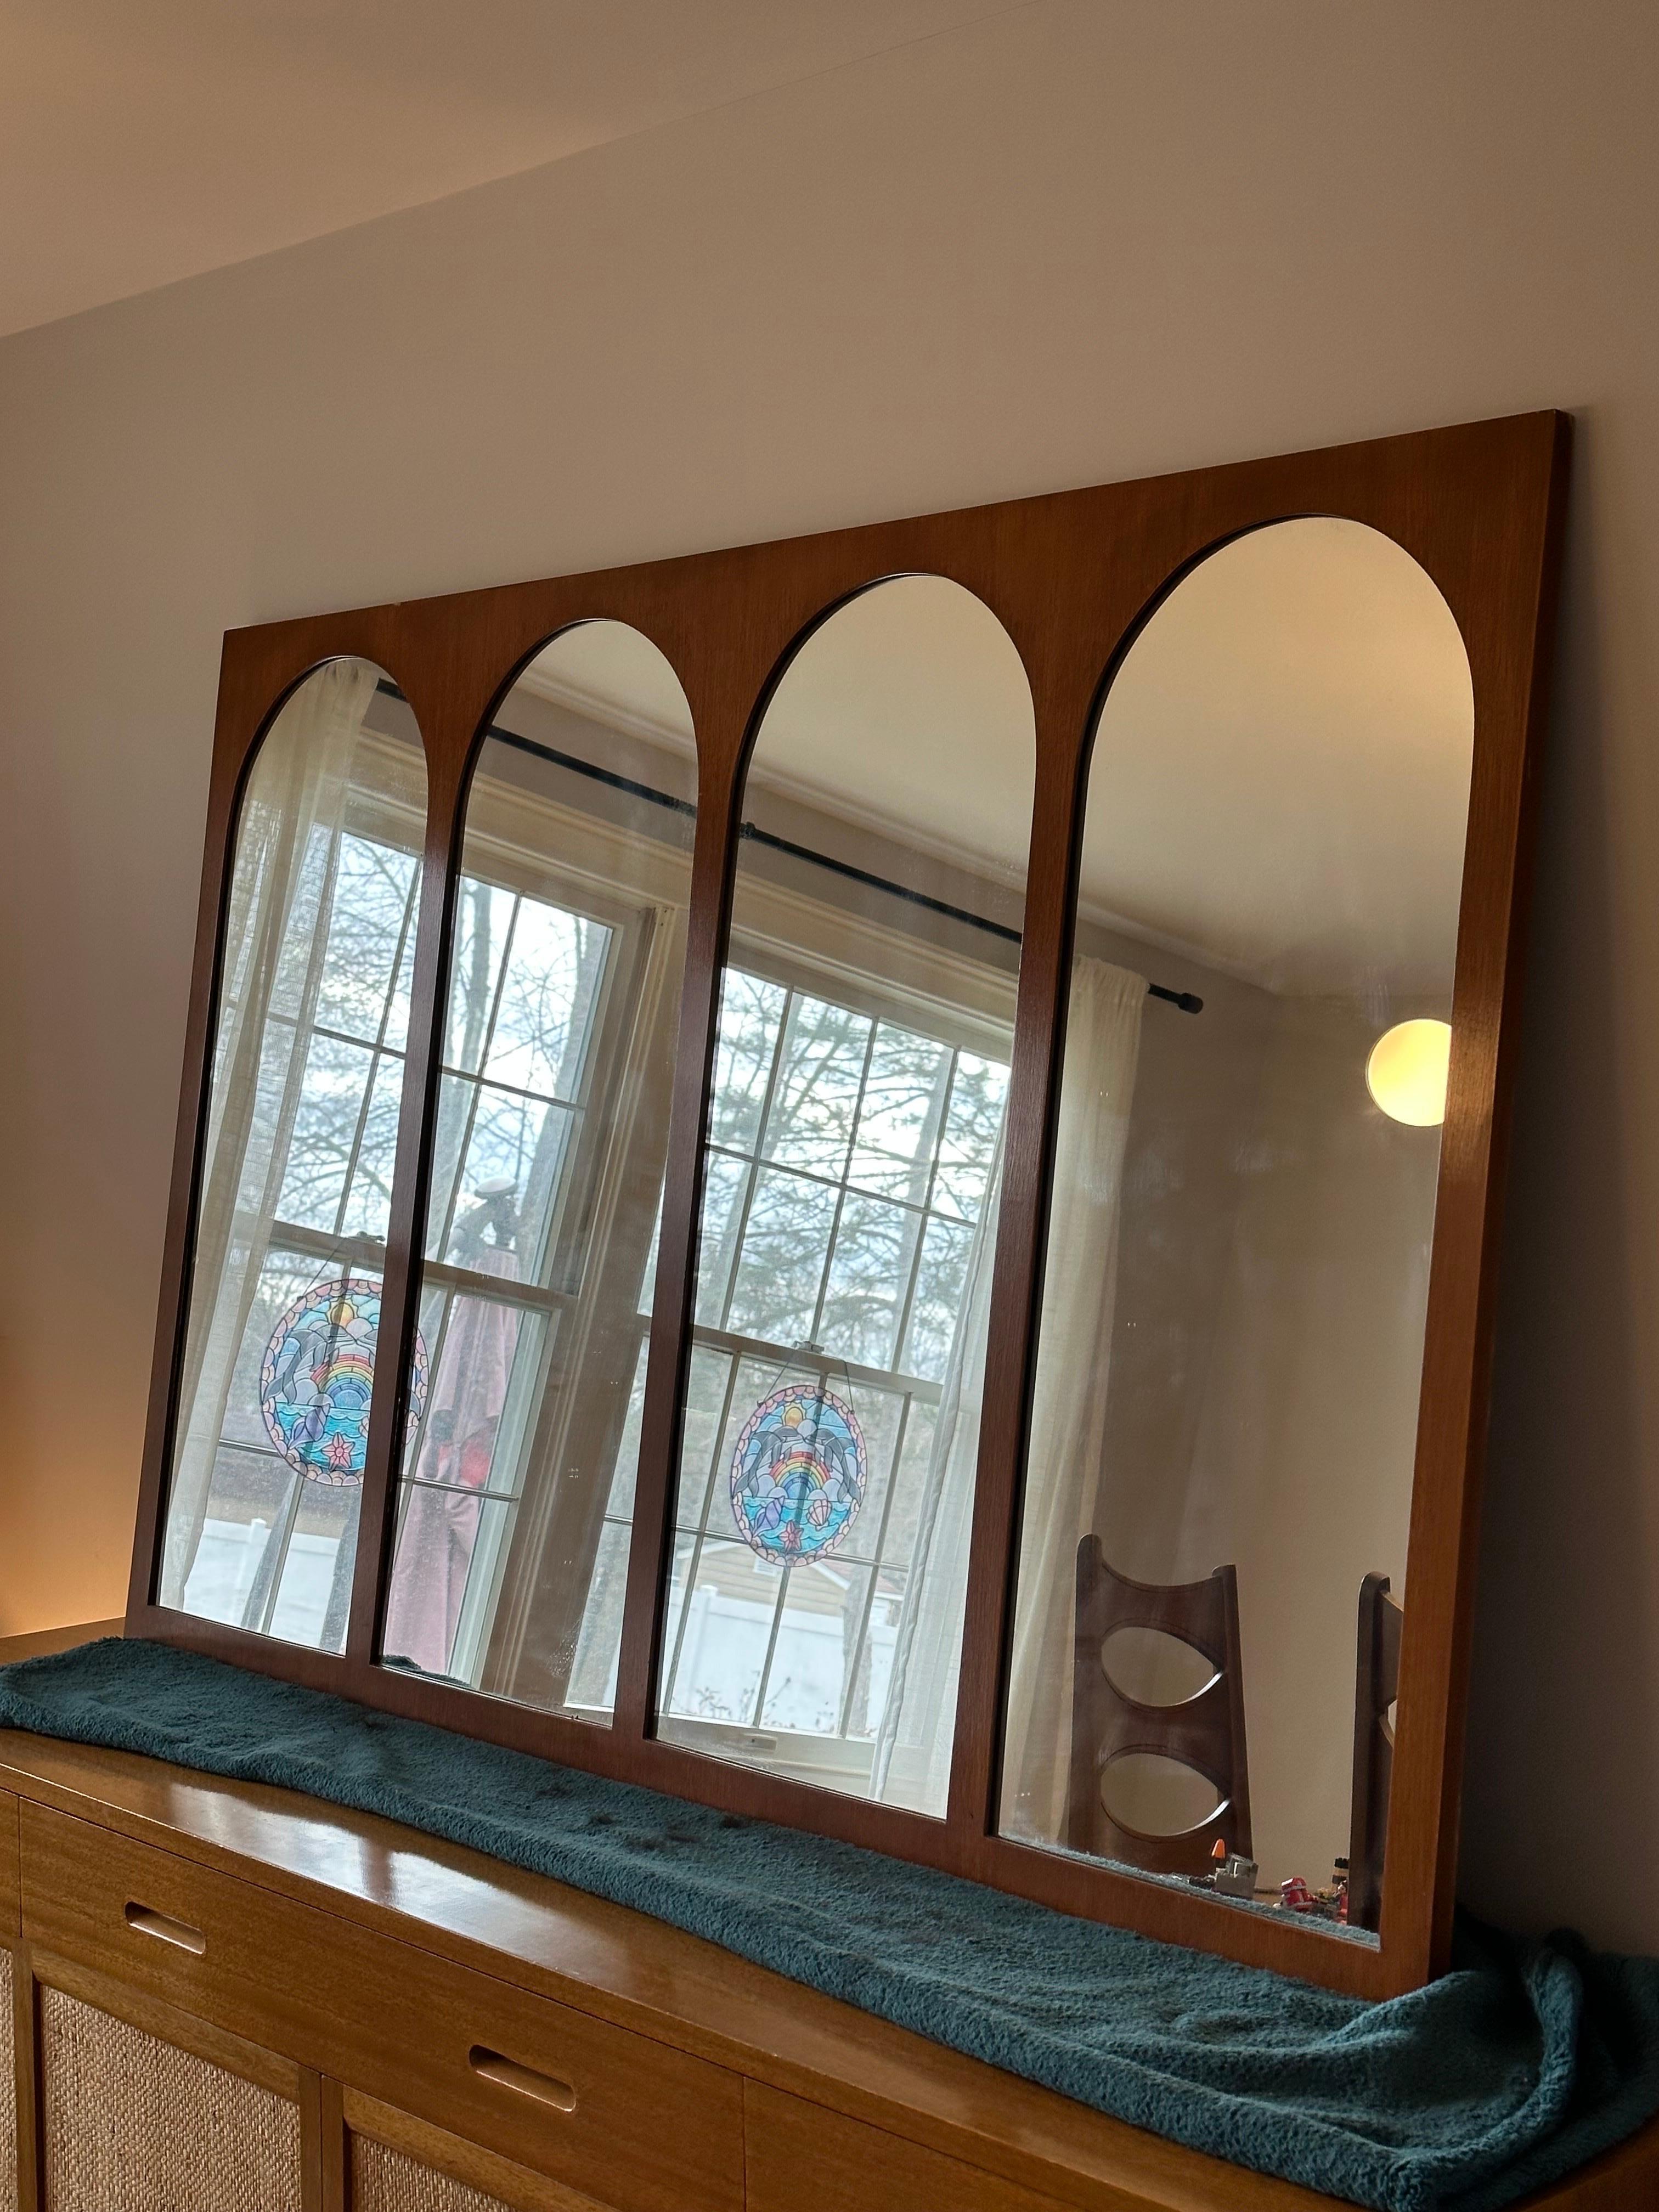 A monumental wall mirror designed by T.H. Robsjohn-Gibbings for Widdicomb. Features four arched mirror sections framed in walnut. A unique and versatile piece that is every bit functional as it is art. This line of furniture from Robsjohn-Gibbings